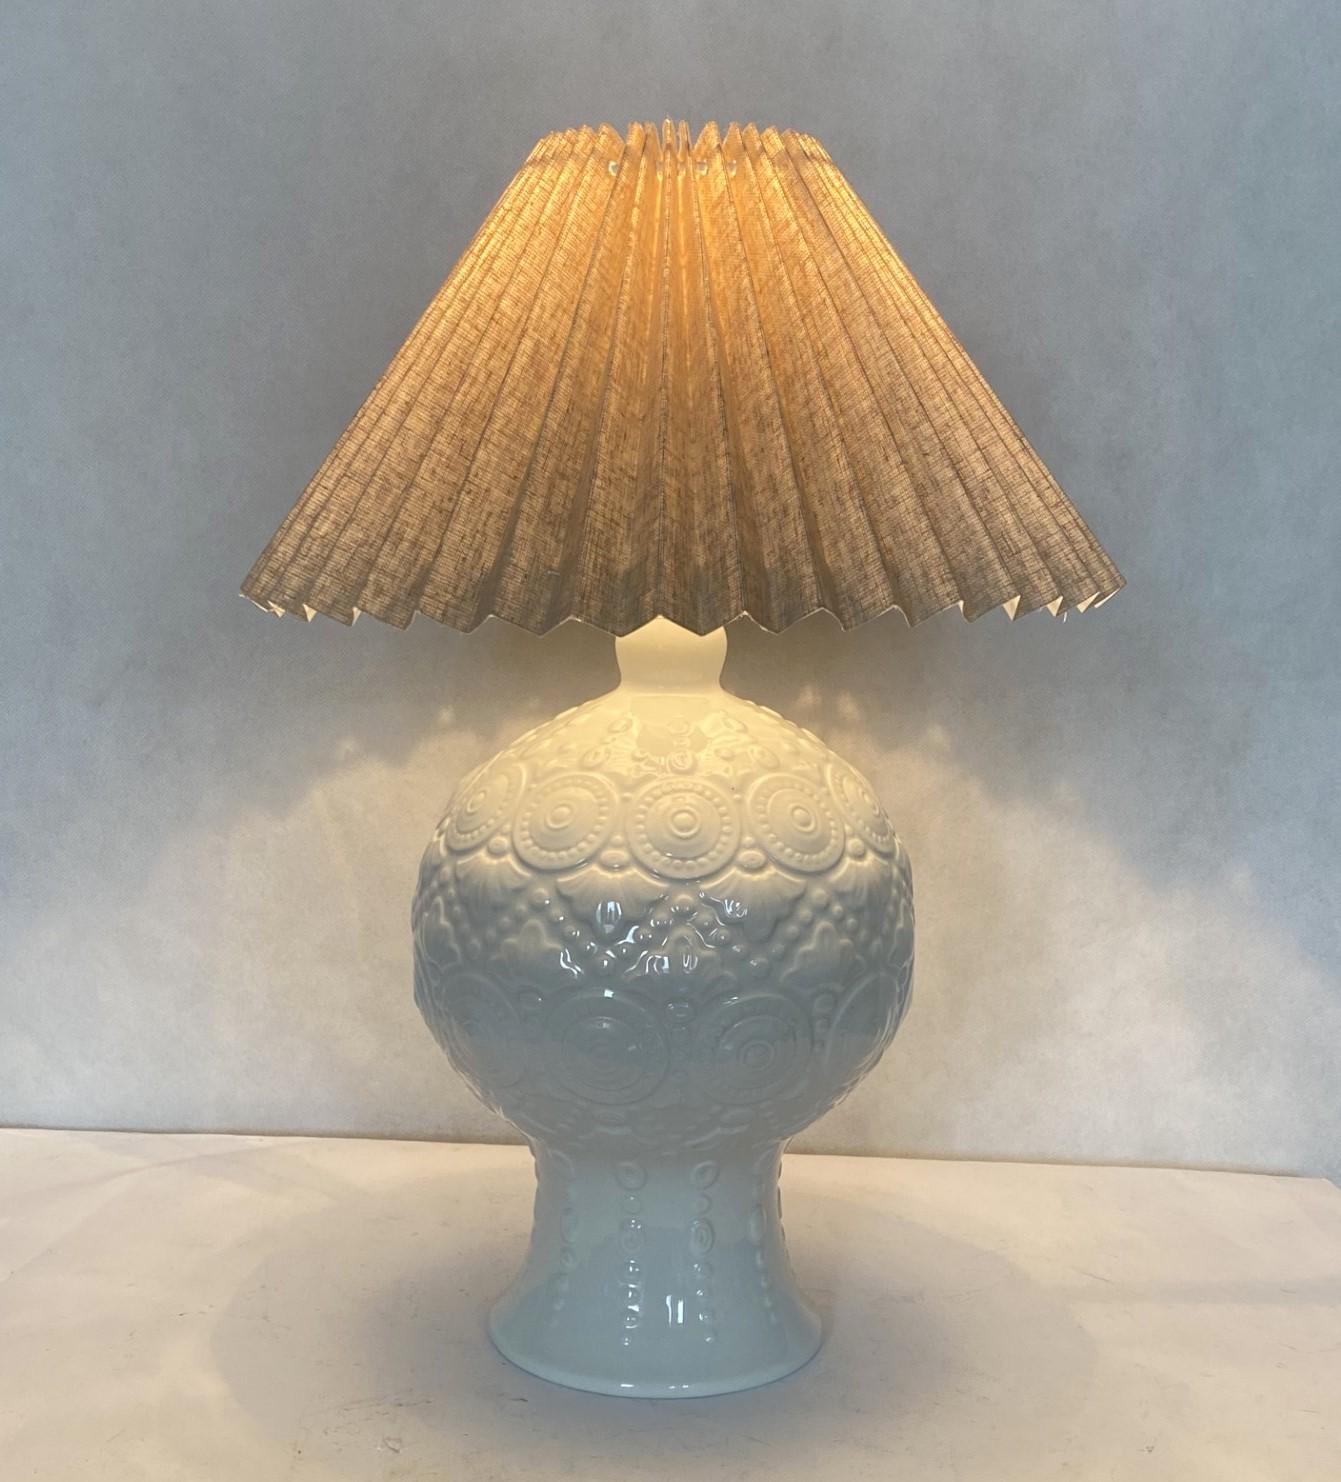 Spanish Hand-Crafted White Glazed Ceramic Table Lamp Textured Relief, 1970s  For Sale 2